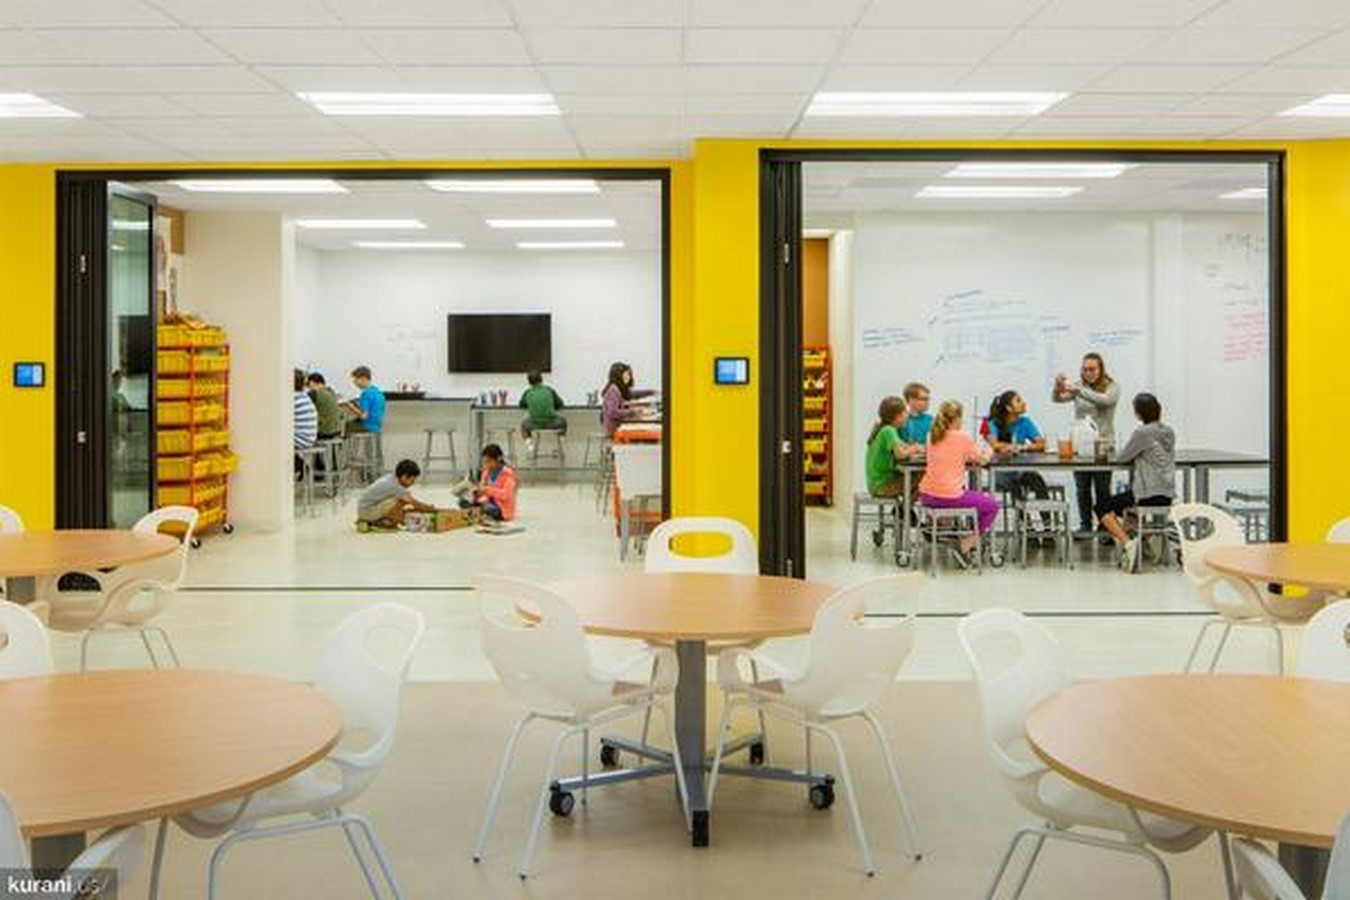 10 Examples of Flexible spaces in education architecture - Sheet7